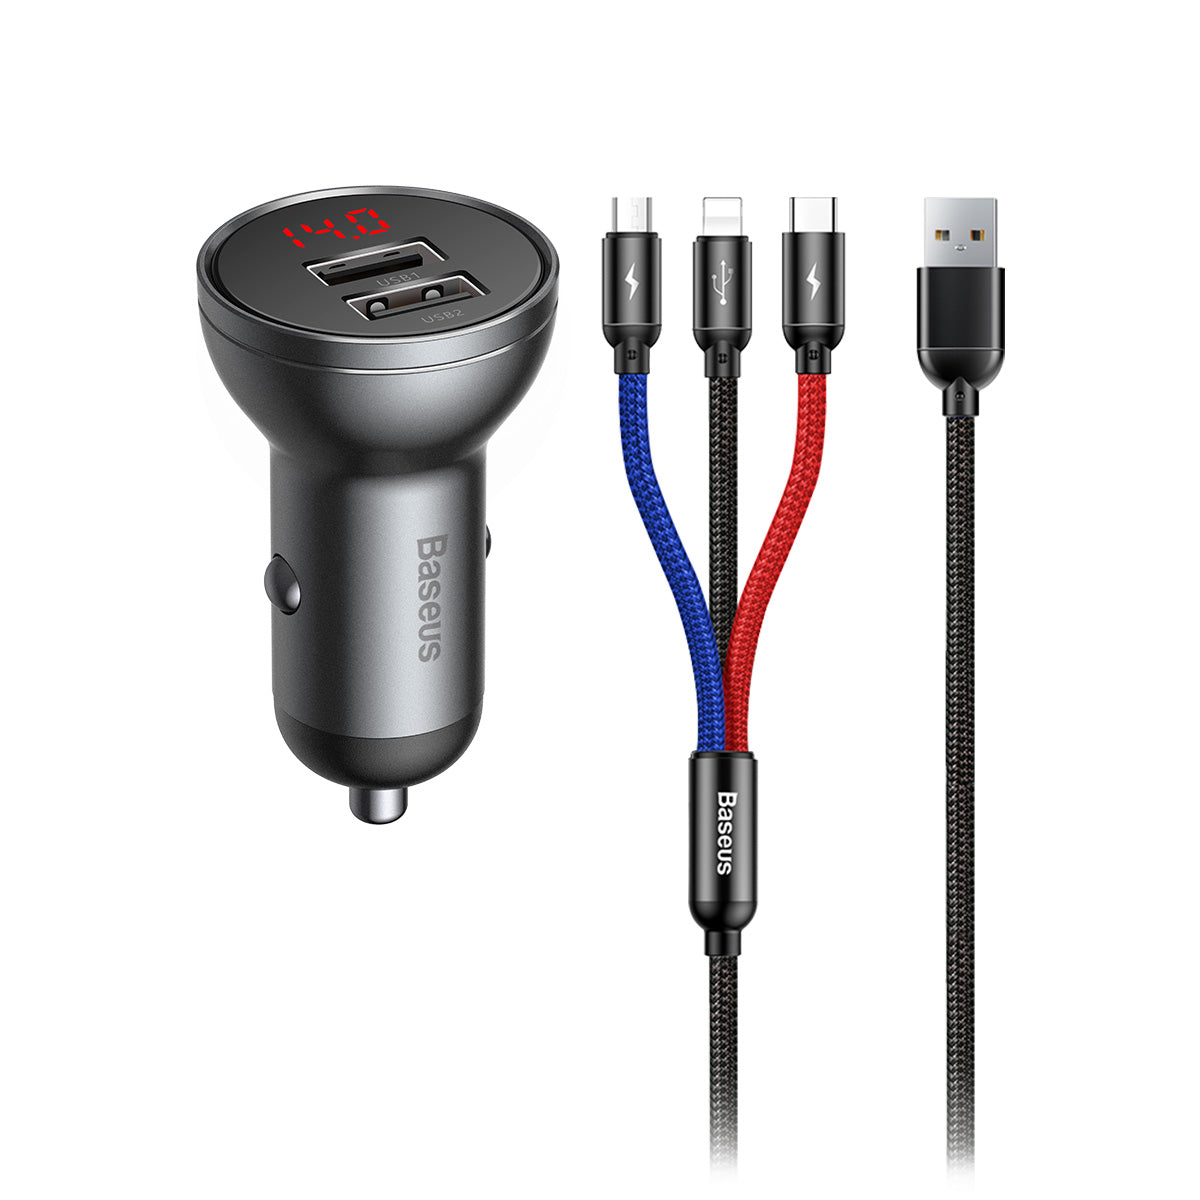 Unplug 2A Micro USB Retractable Car Charger with Universal USB Port